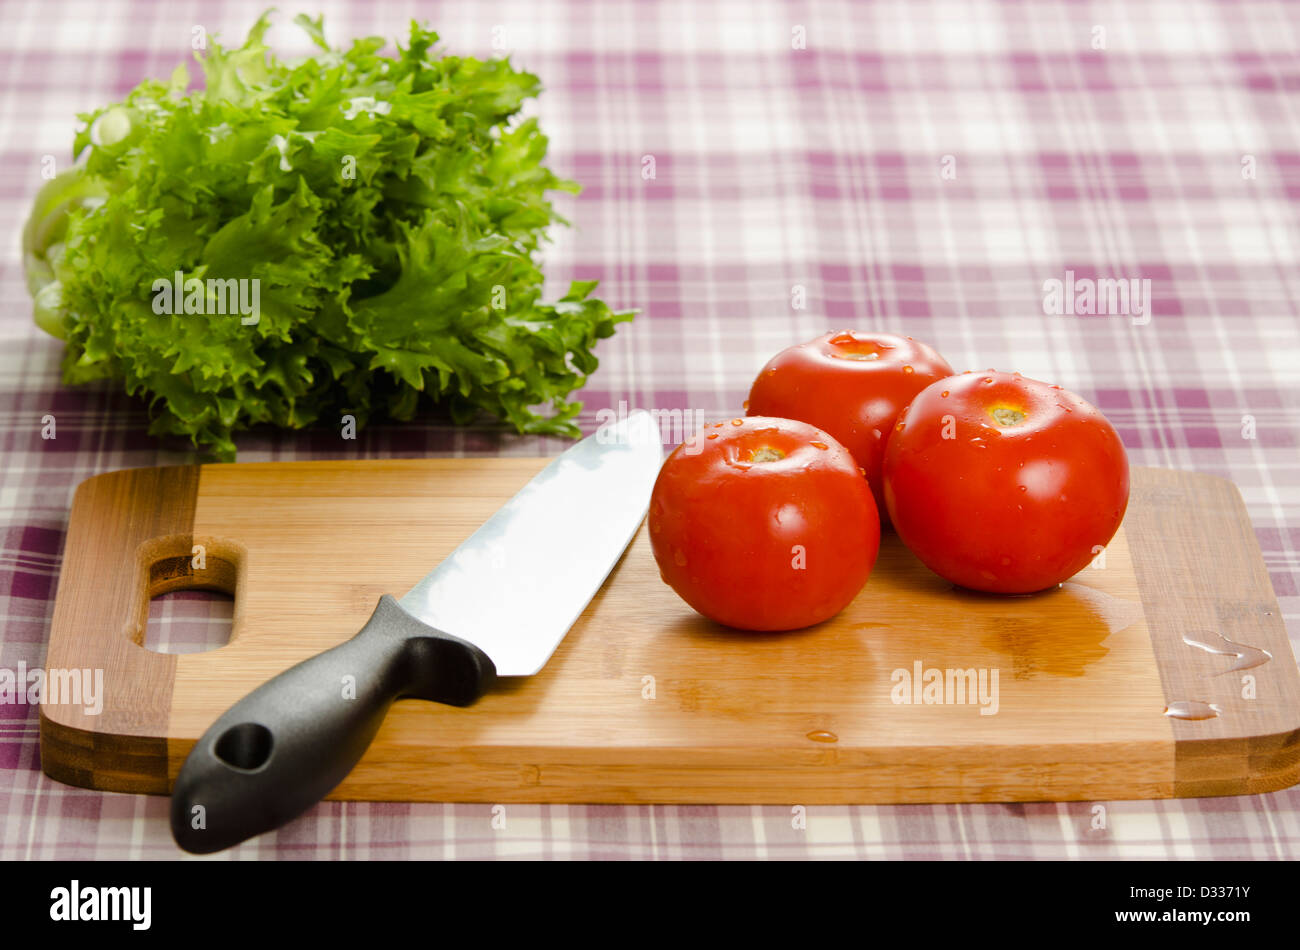 Tomatoes and lettuce on table with chopping board and knife. Healthy and fresh ingredients ready to be processed to food. Stock Photo